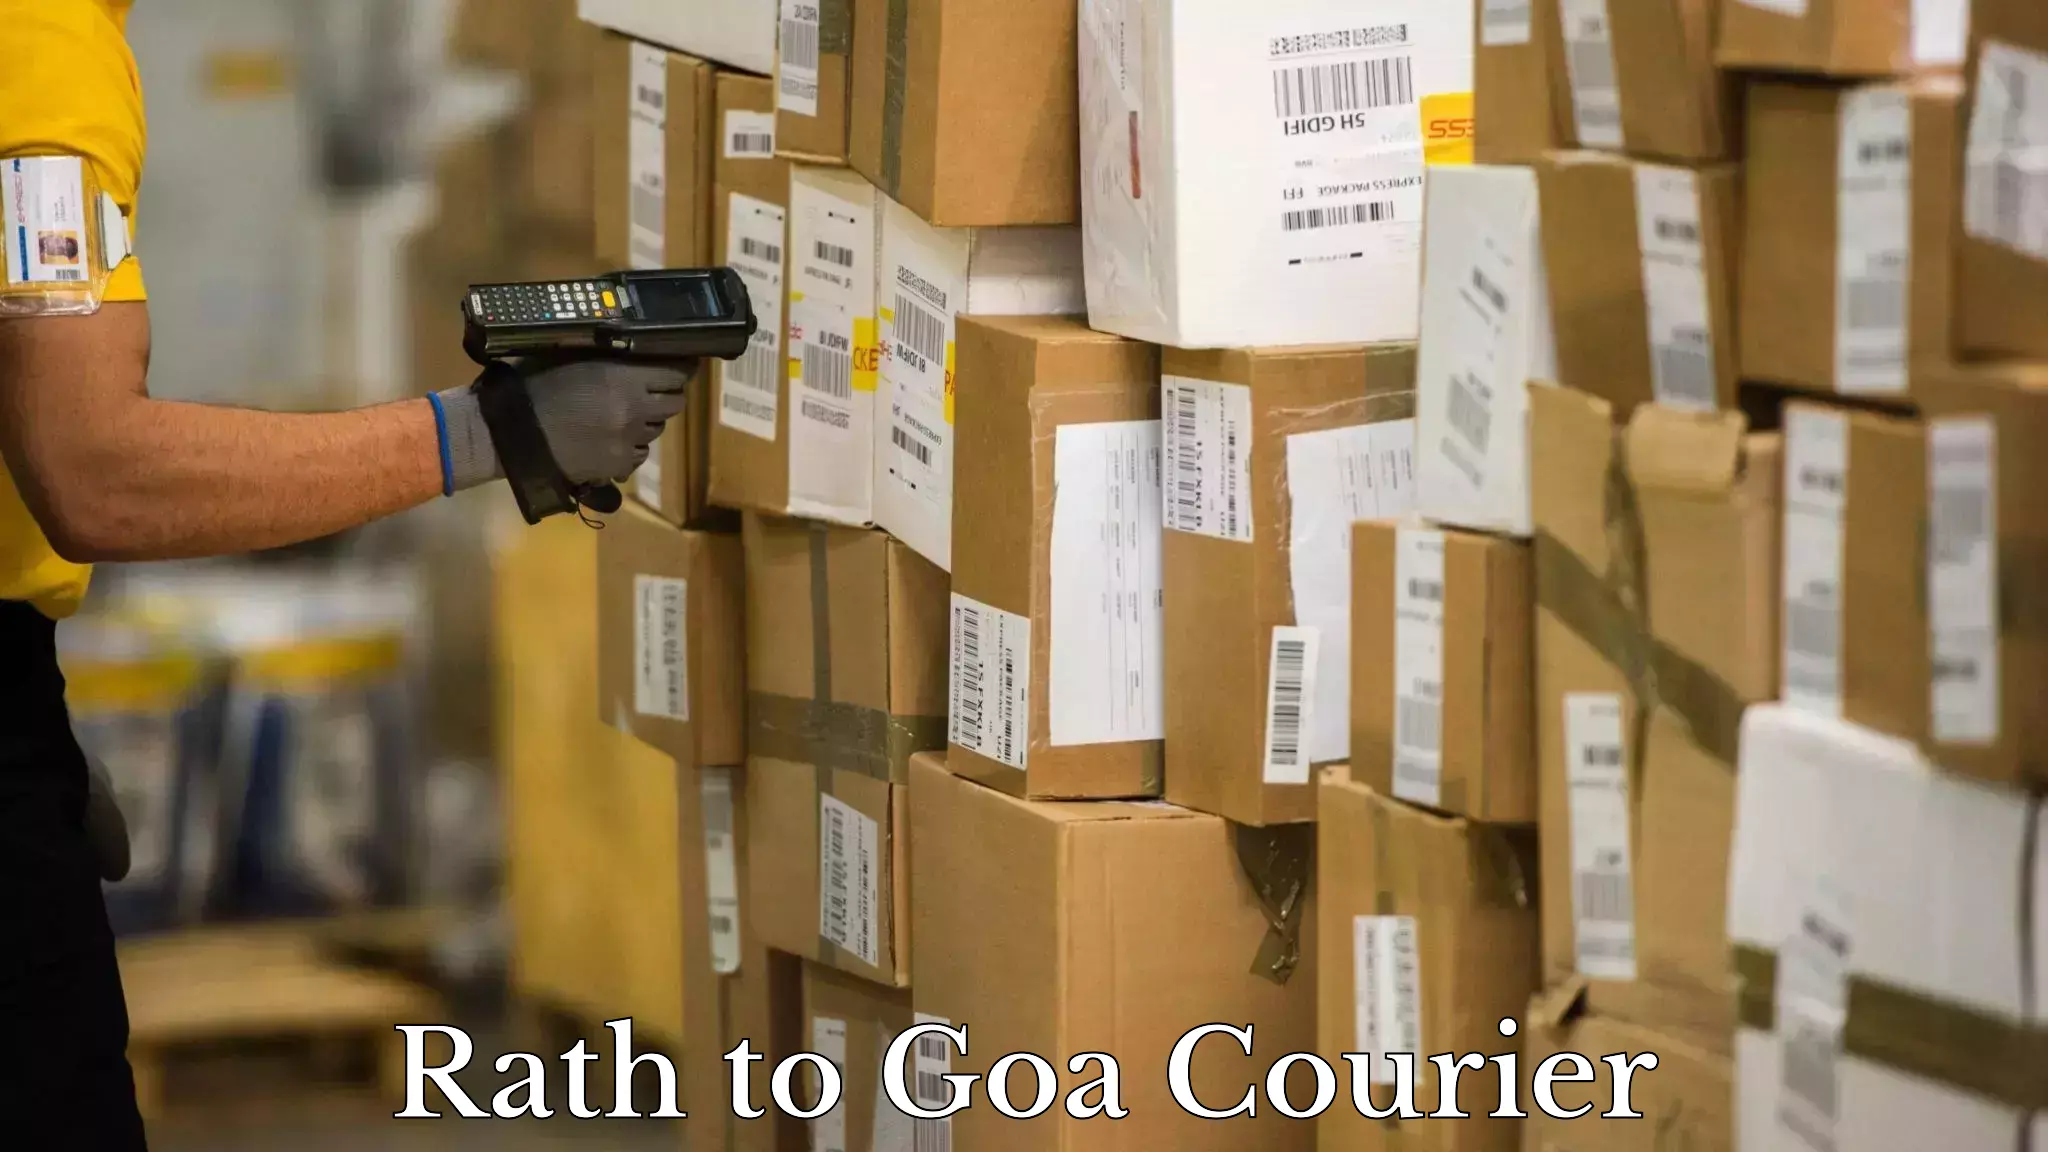 Nationwide delivery network Rath to Goa